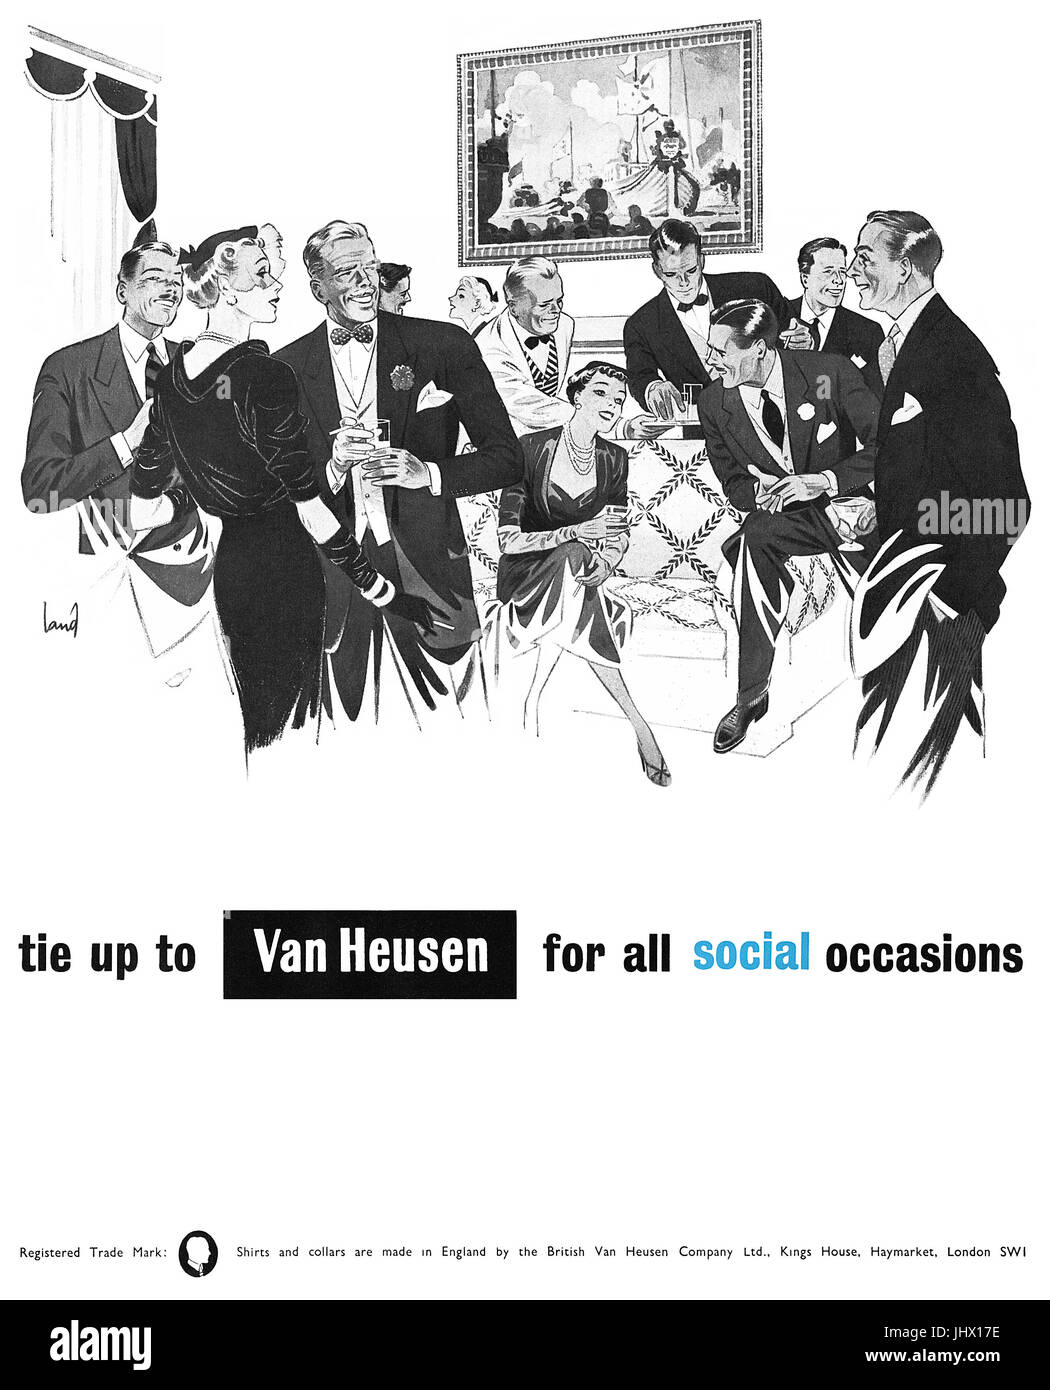 Van Heusen may source from abroad to avoid excise impost - The Hindu  BusinessLine